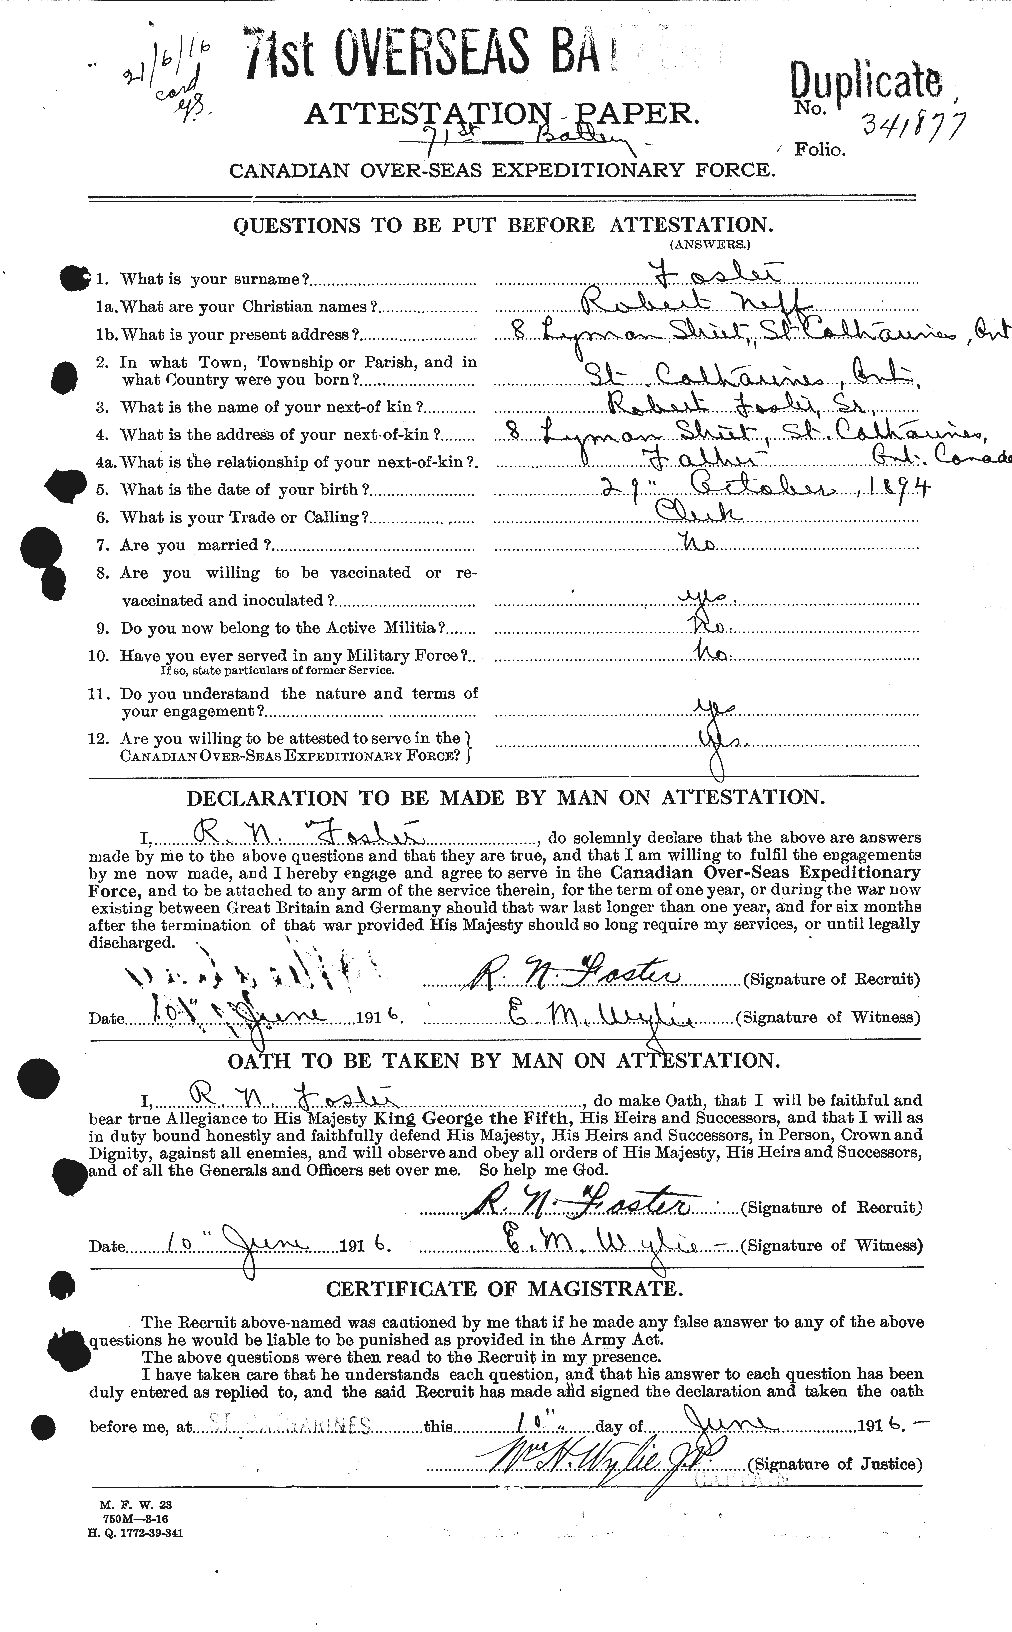 Personnel Records of the First World War - CEF 335182a